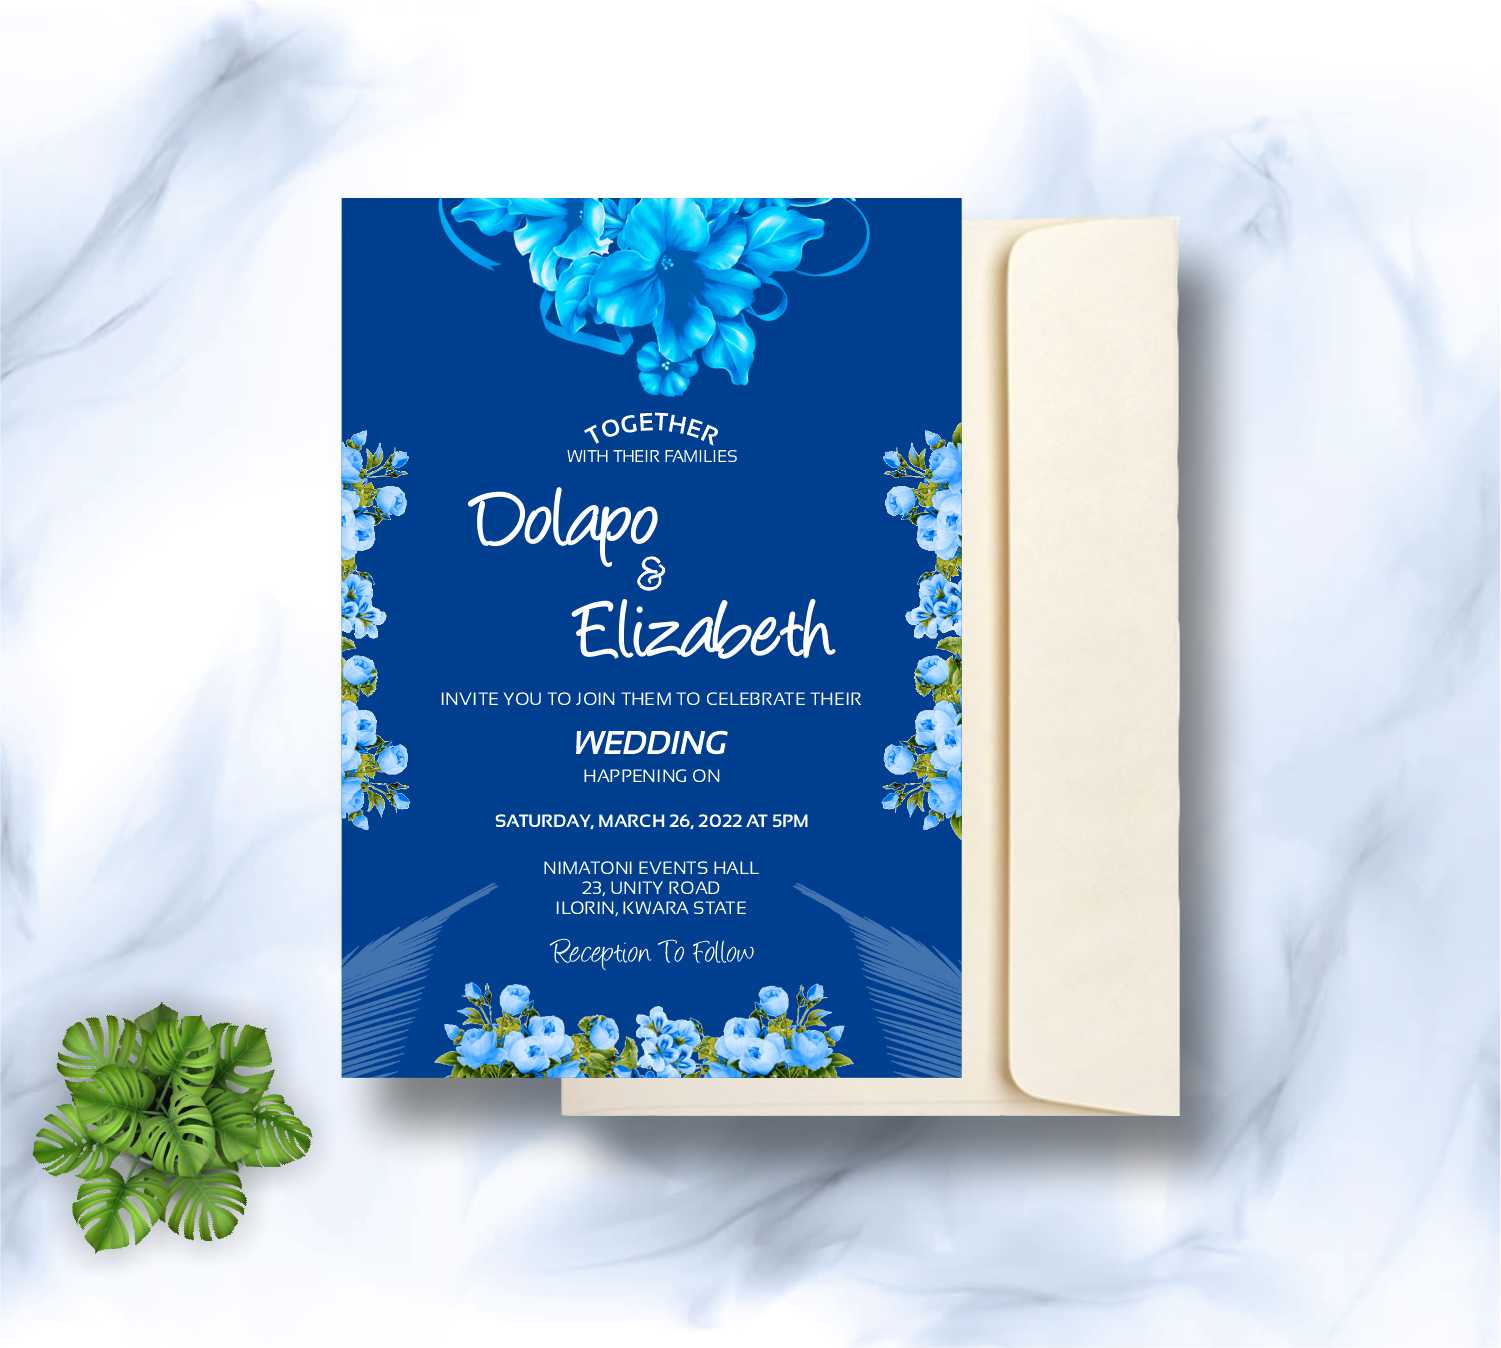 Get White And Gold Wedding Invitation Cards Design And Printing - Design  And Printing Company In Kwara State, Nigeria